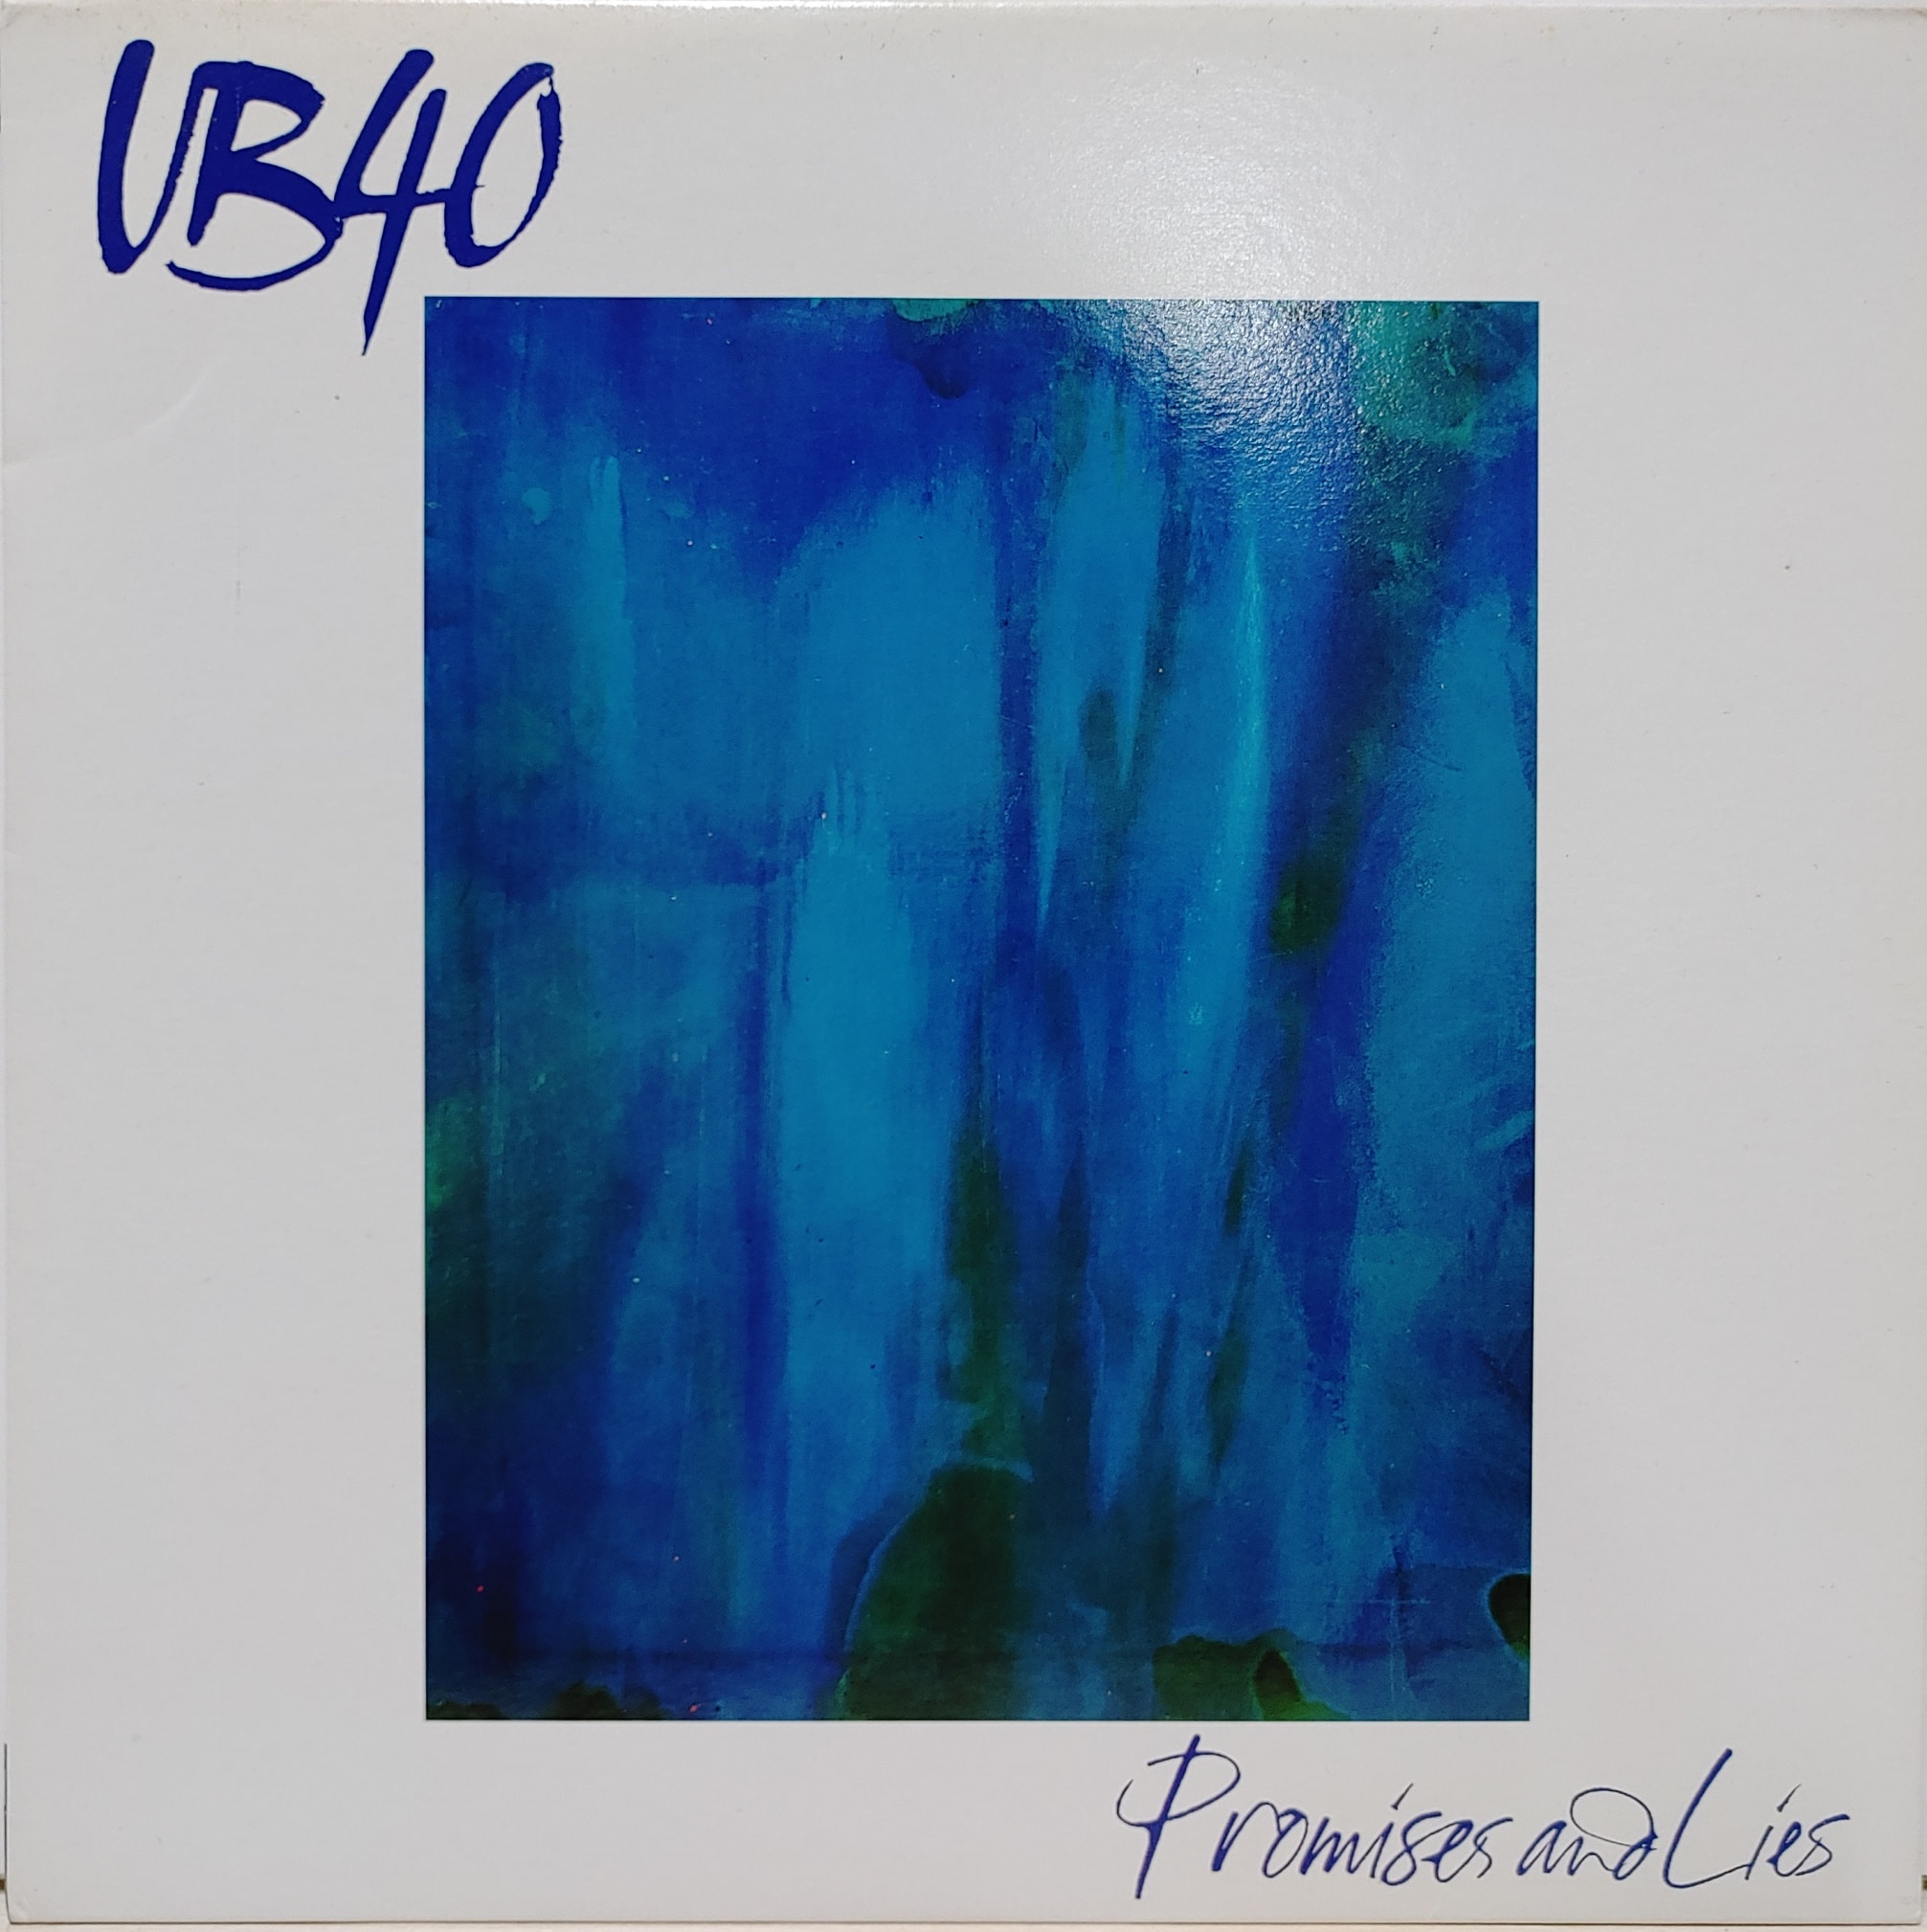 UB40 / PROMISES AND LIES